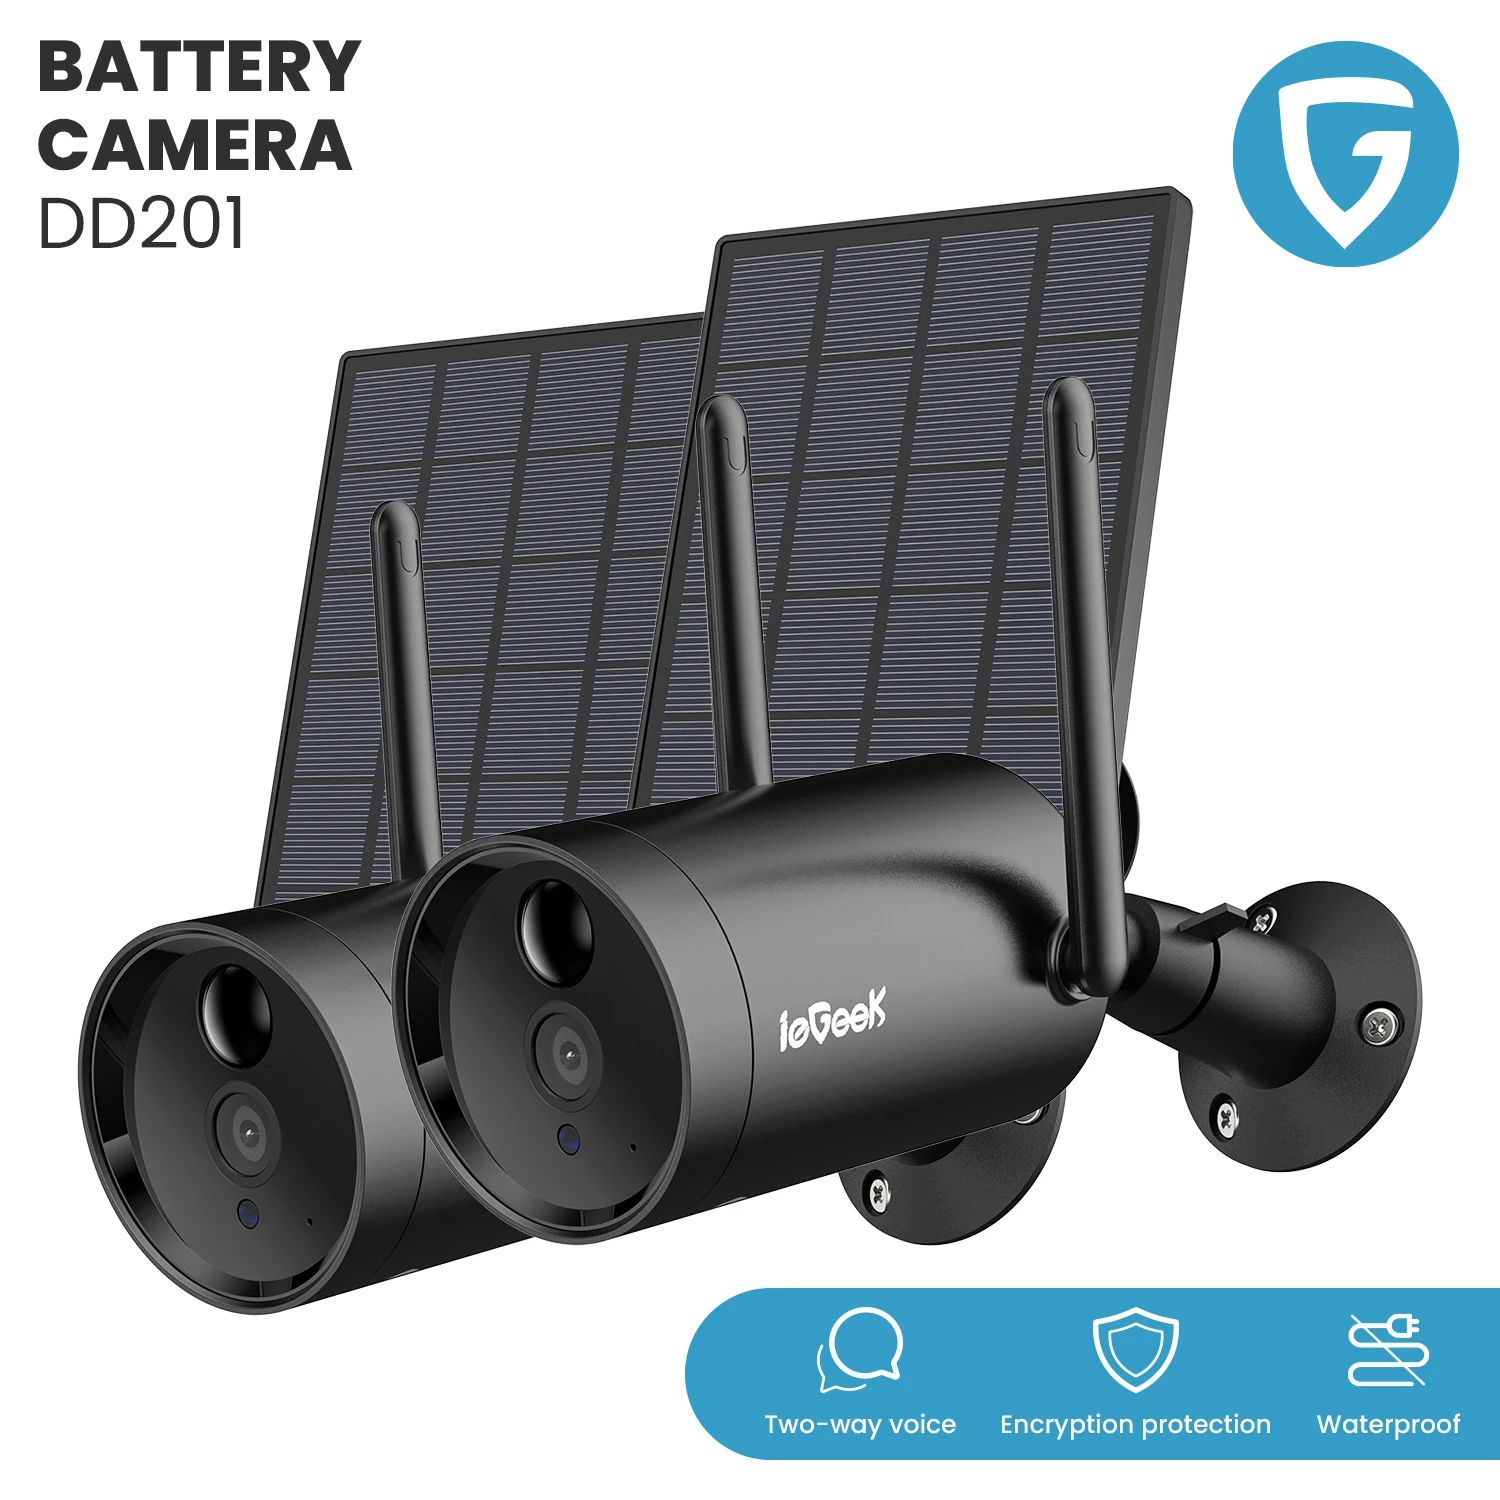 

2PCS/Lot ieGeek Outdoor WiFi Solar Battery Powered Camera 1080P Security Protection Home IP Camera, PIR Motion Detection